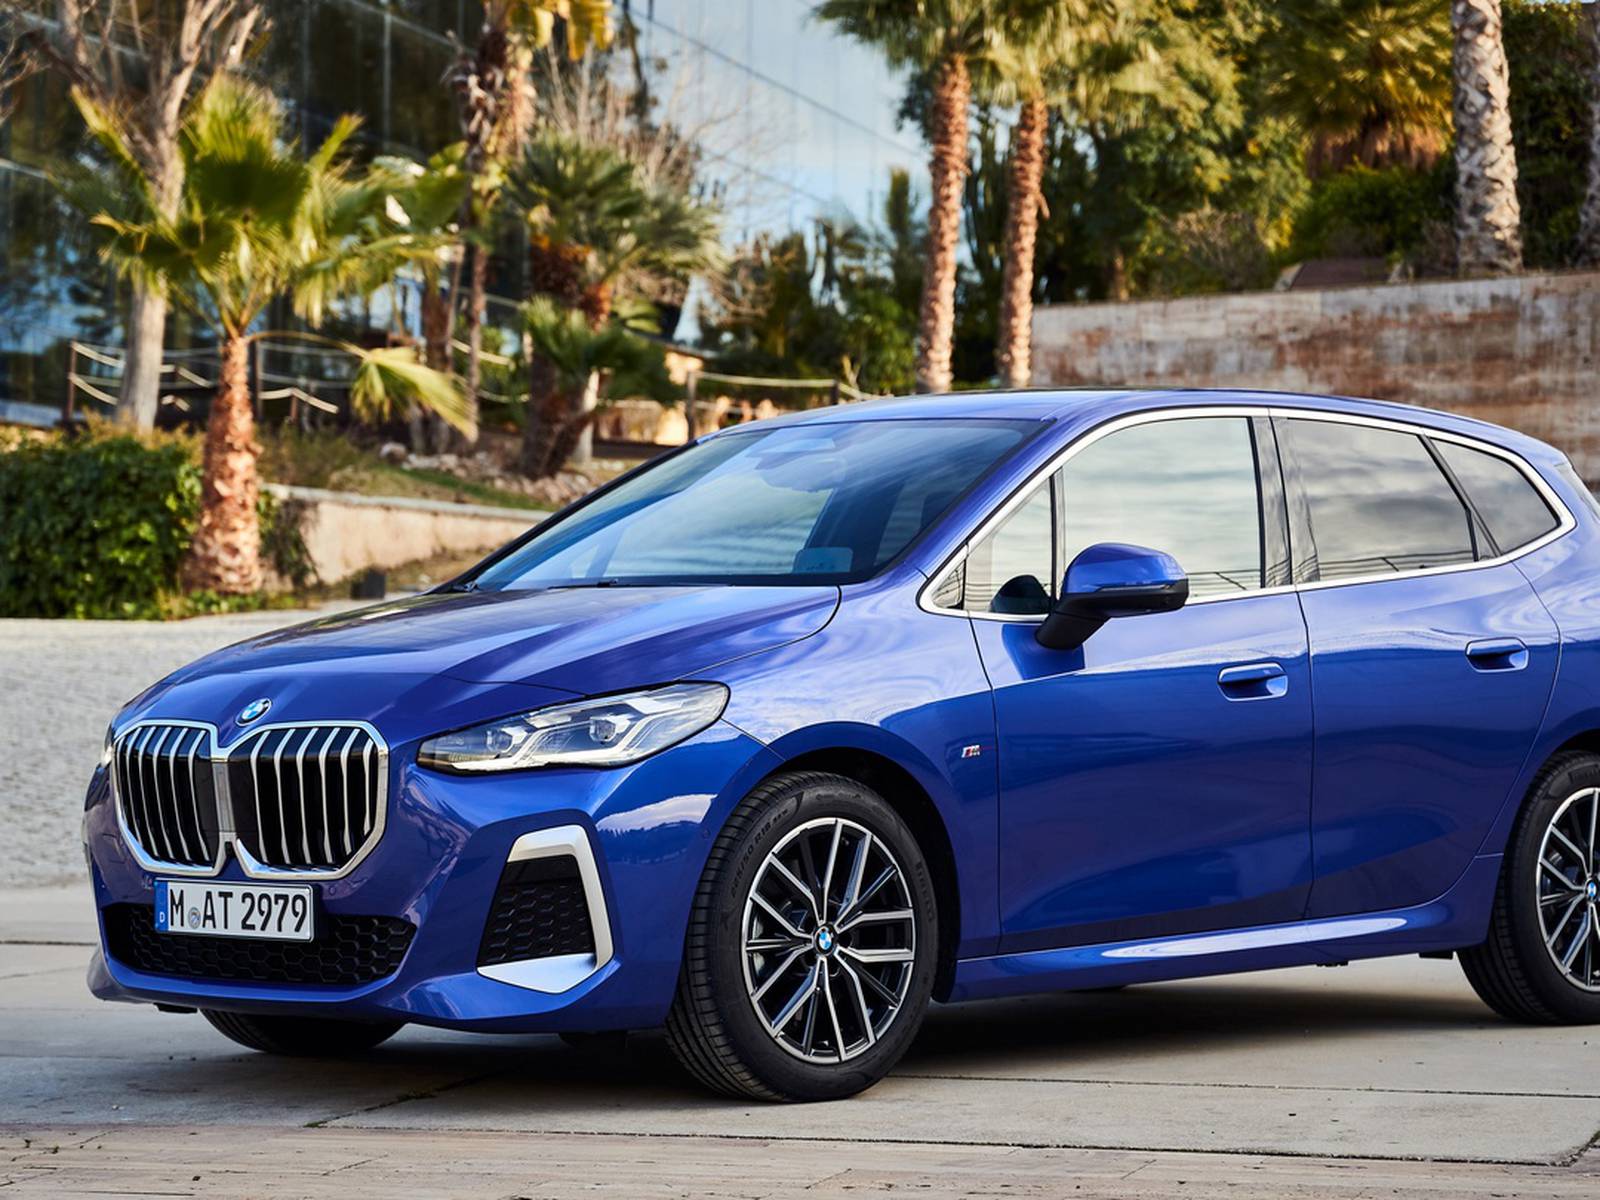 BMW 2 Series Active Tourer: Premium quality but lacks people-carrier  practicality – The Irish Times